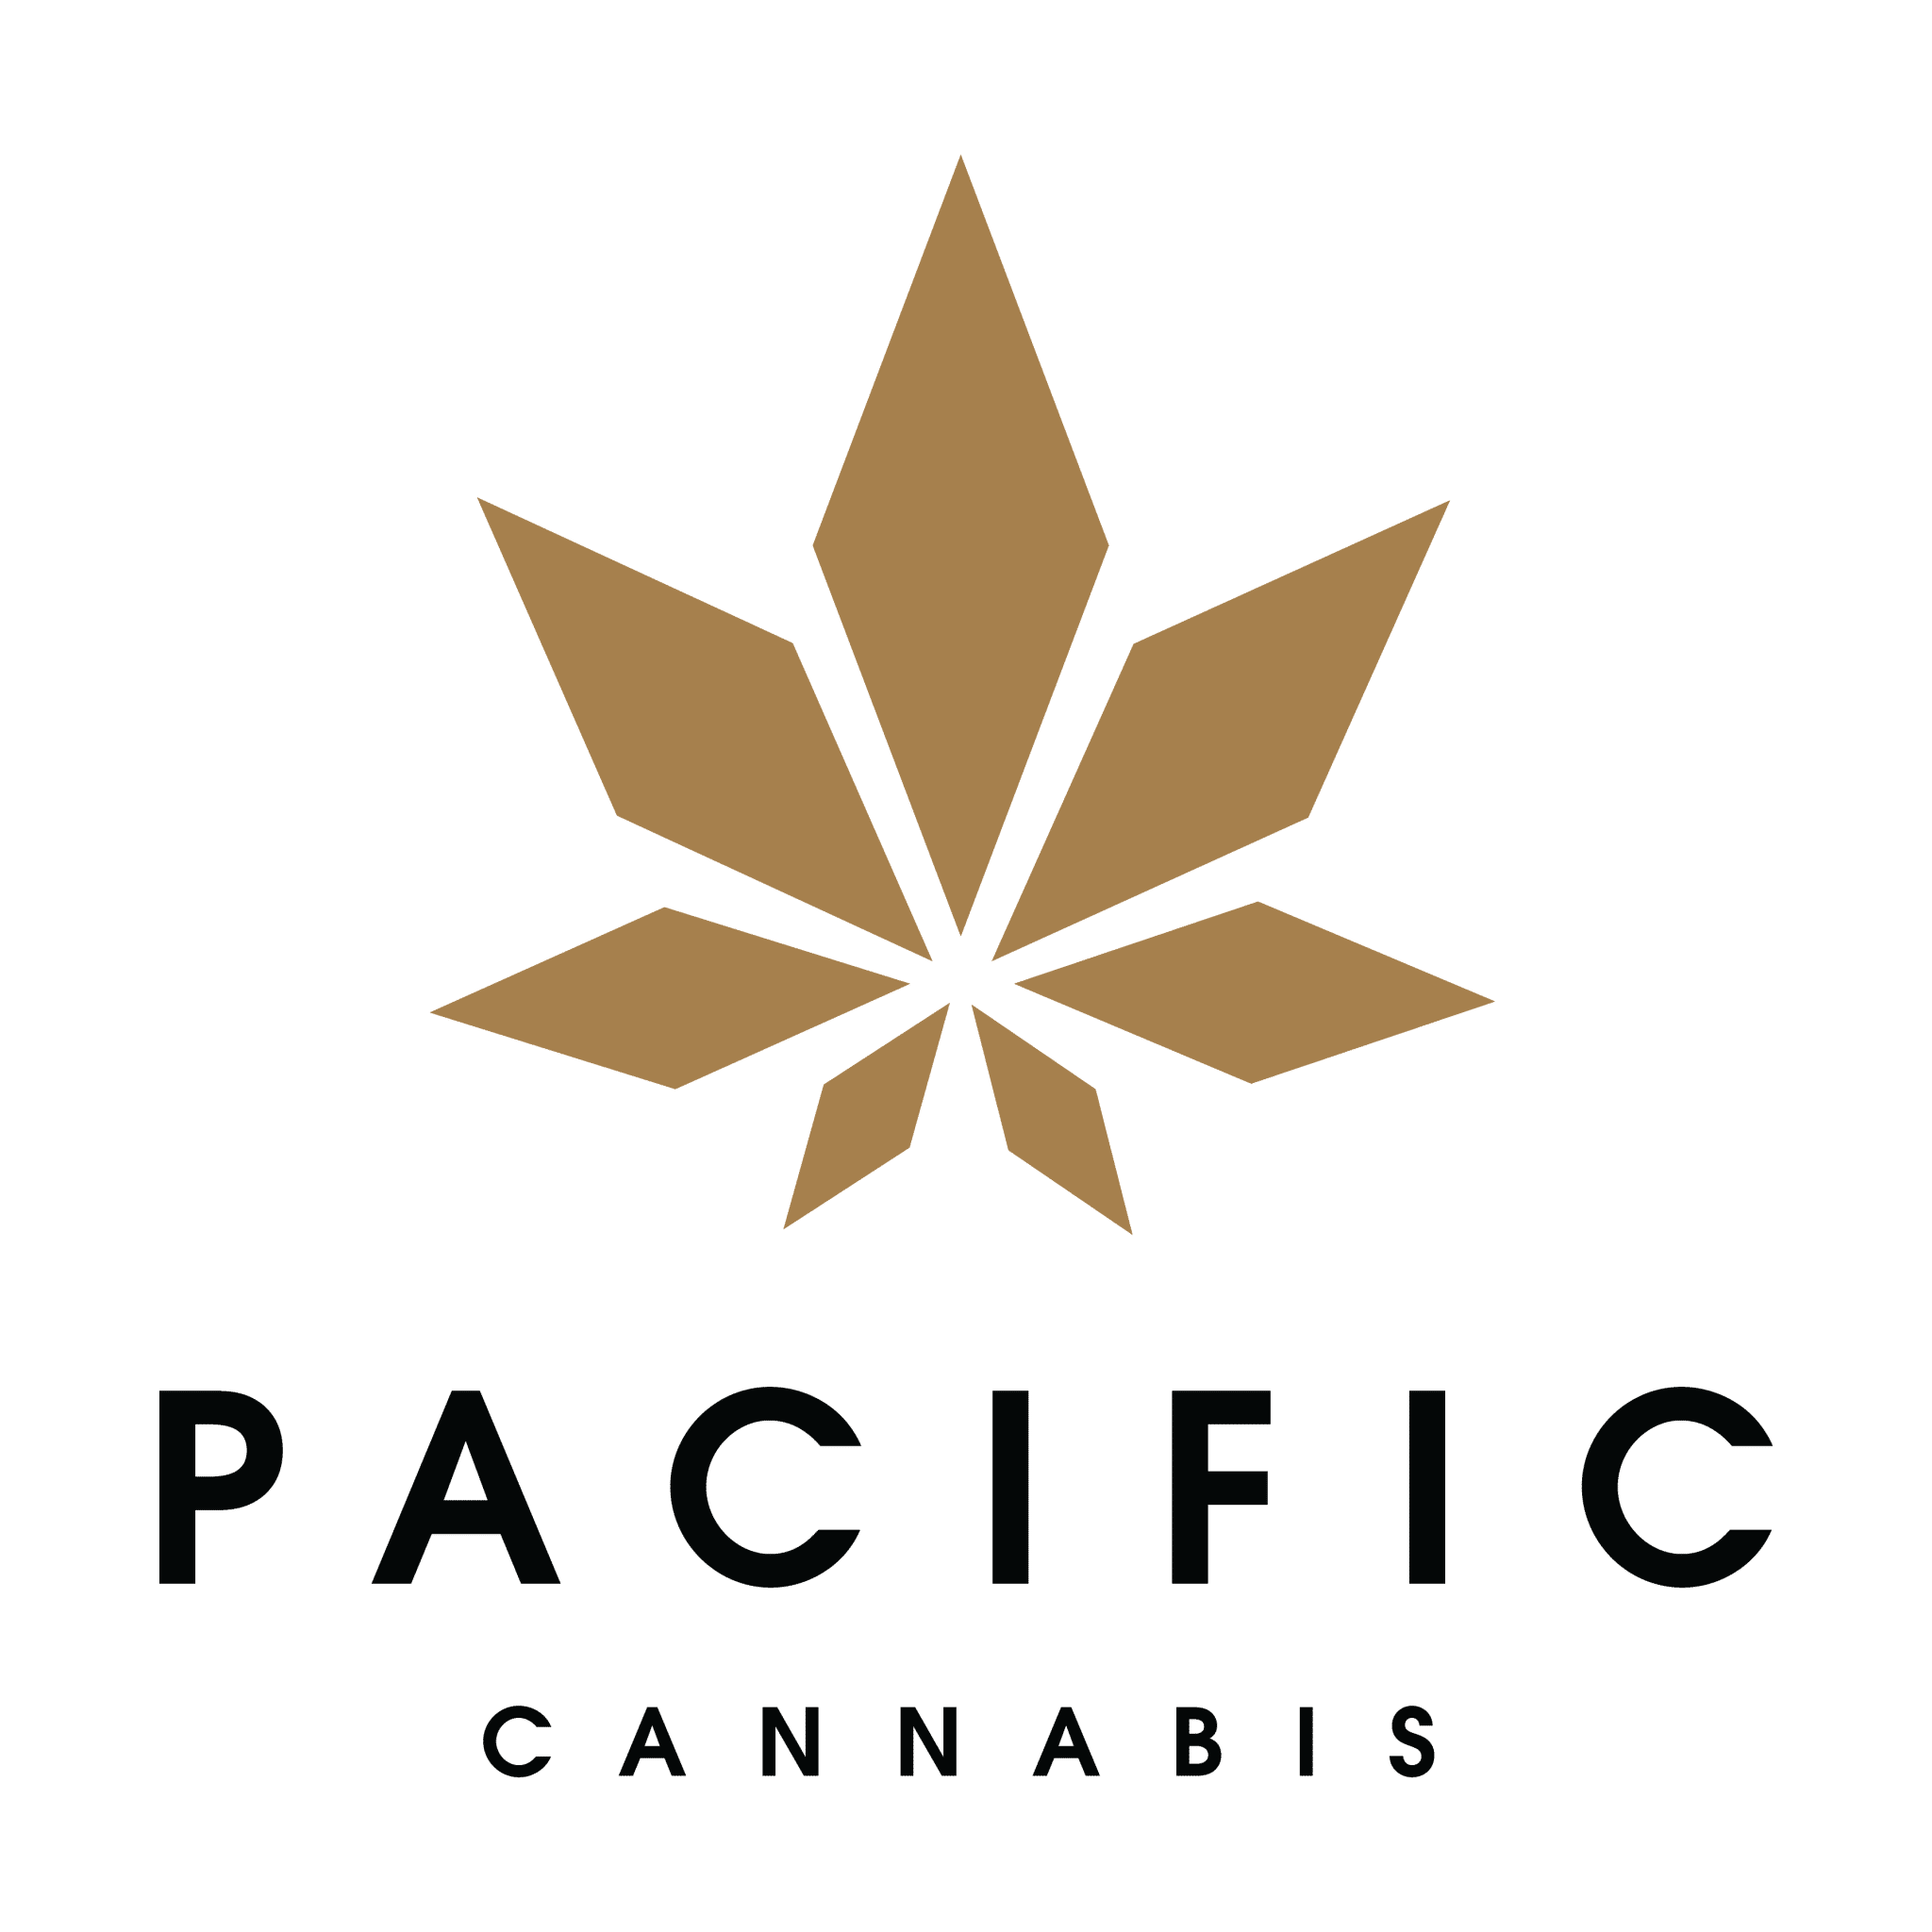 #1 Online Dispensary Canada - Pacific Cannabis